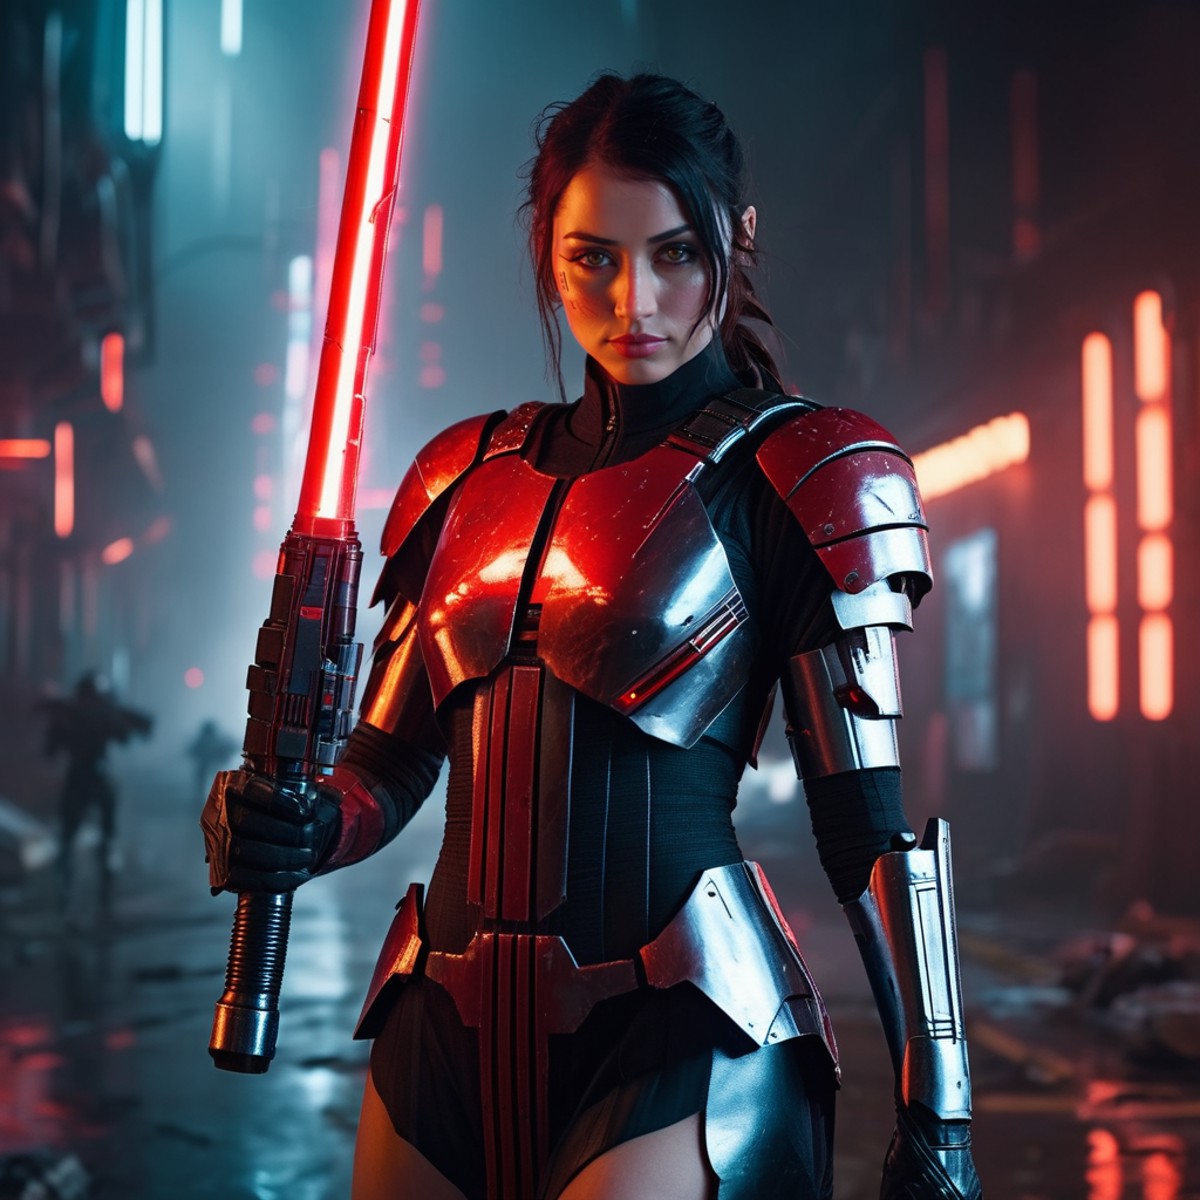 Photo of a female soldier in the year 2436 with futuristic cybernetic enhancements holding a red lightsaber, dystopian bac...